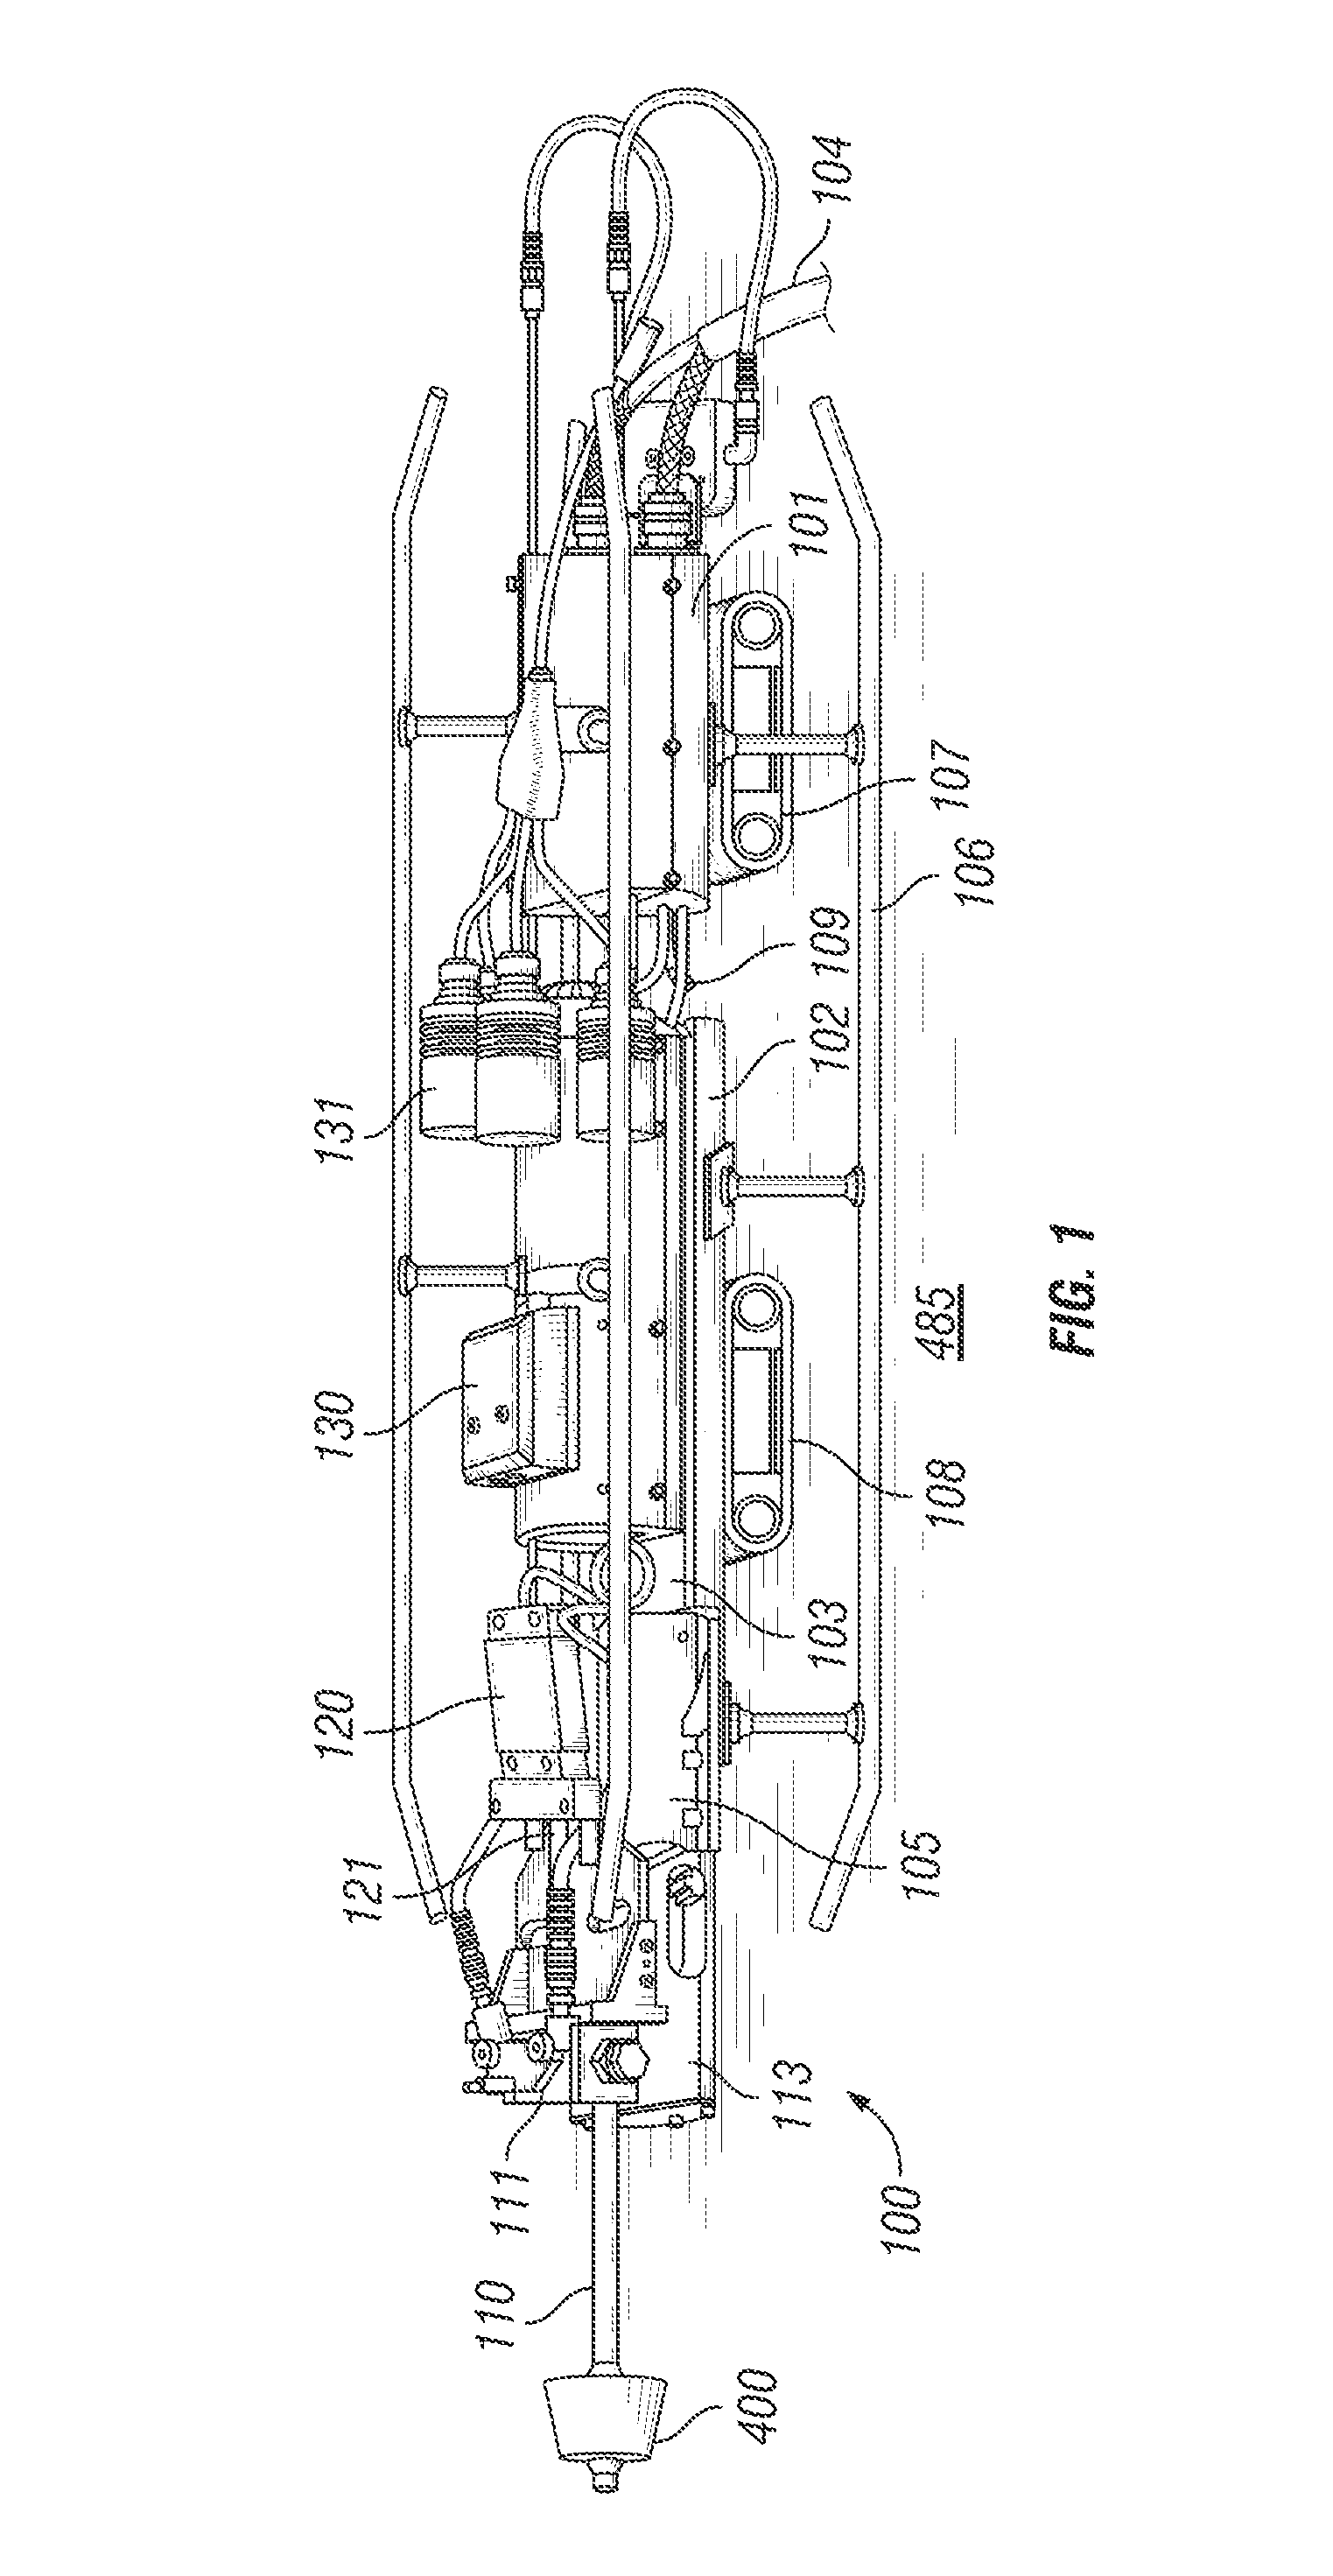 Method and apparatus of lining pipes with environmentally compatible impervious membrane